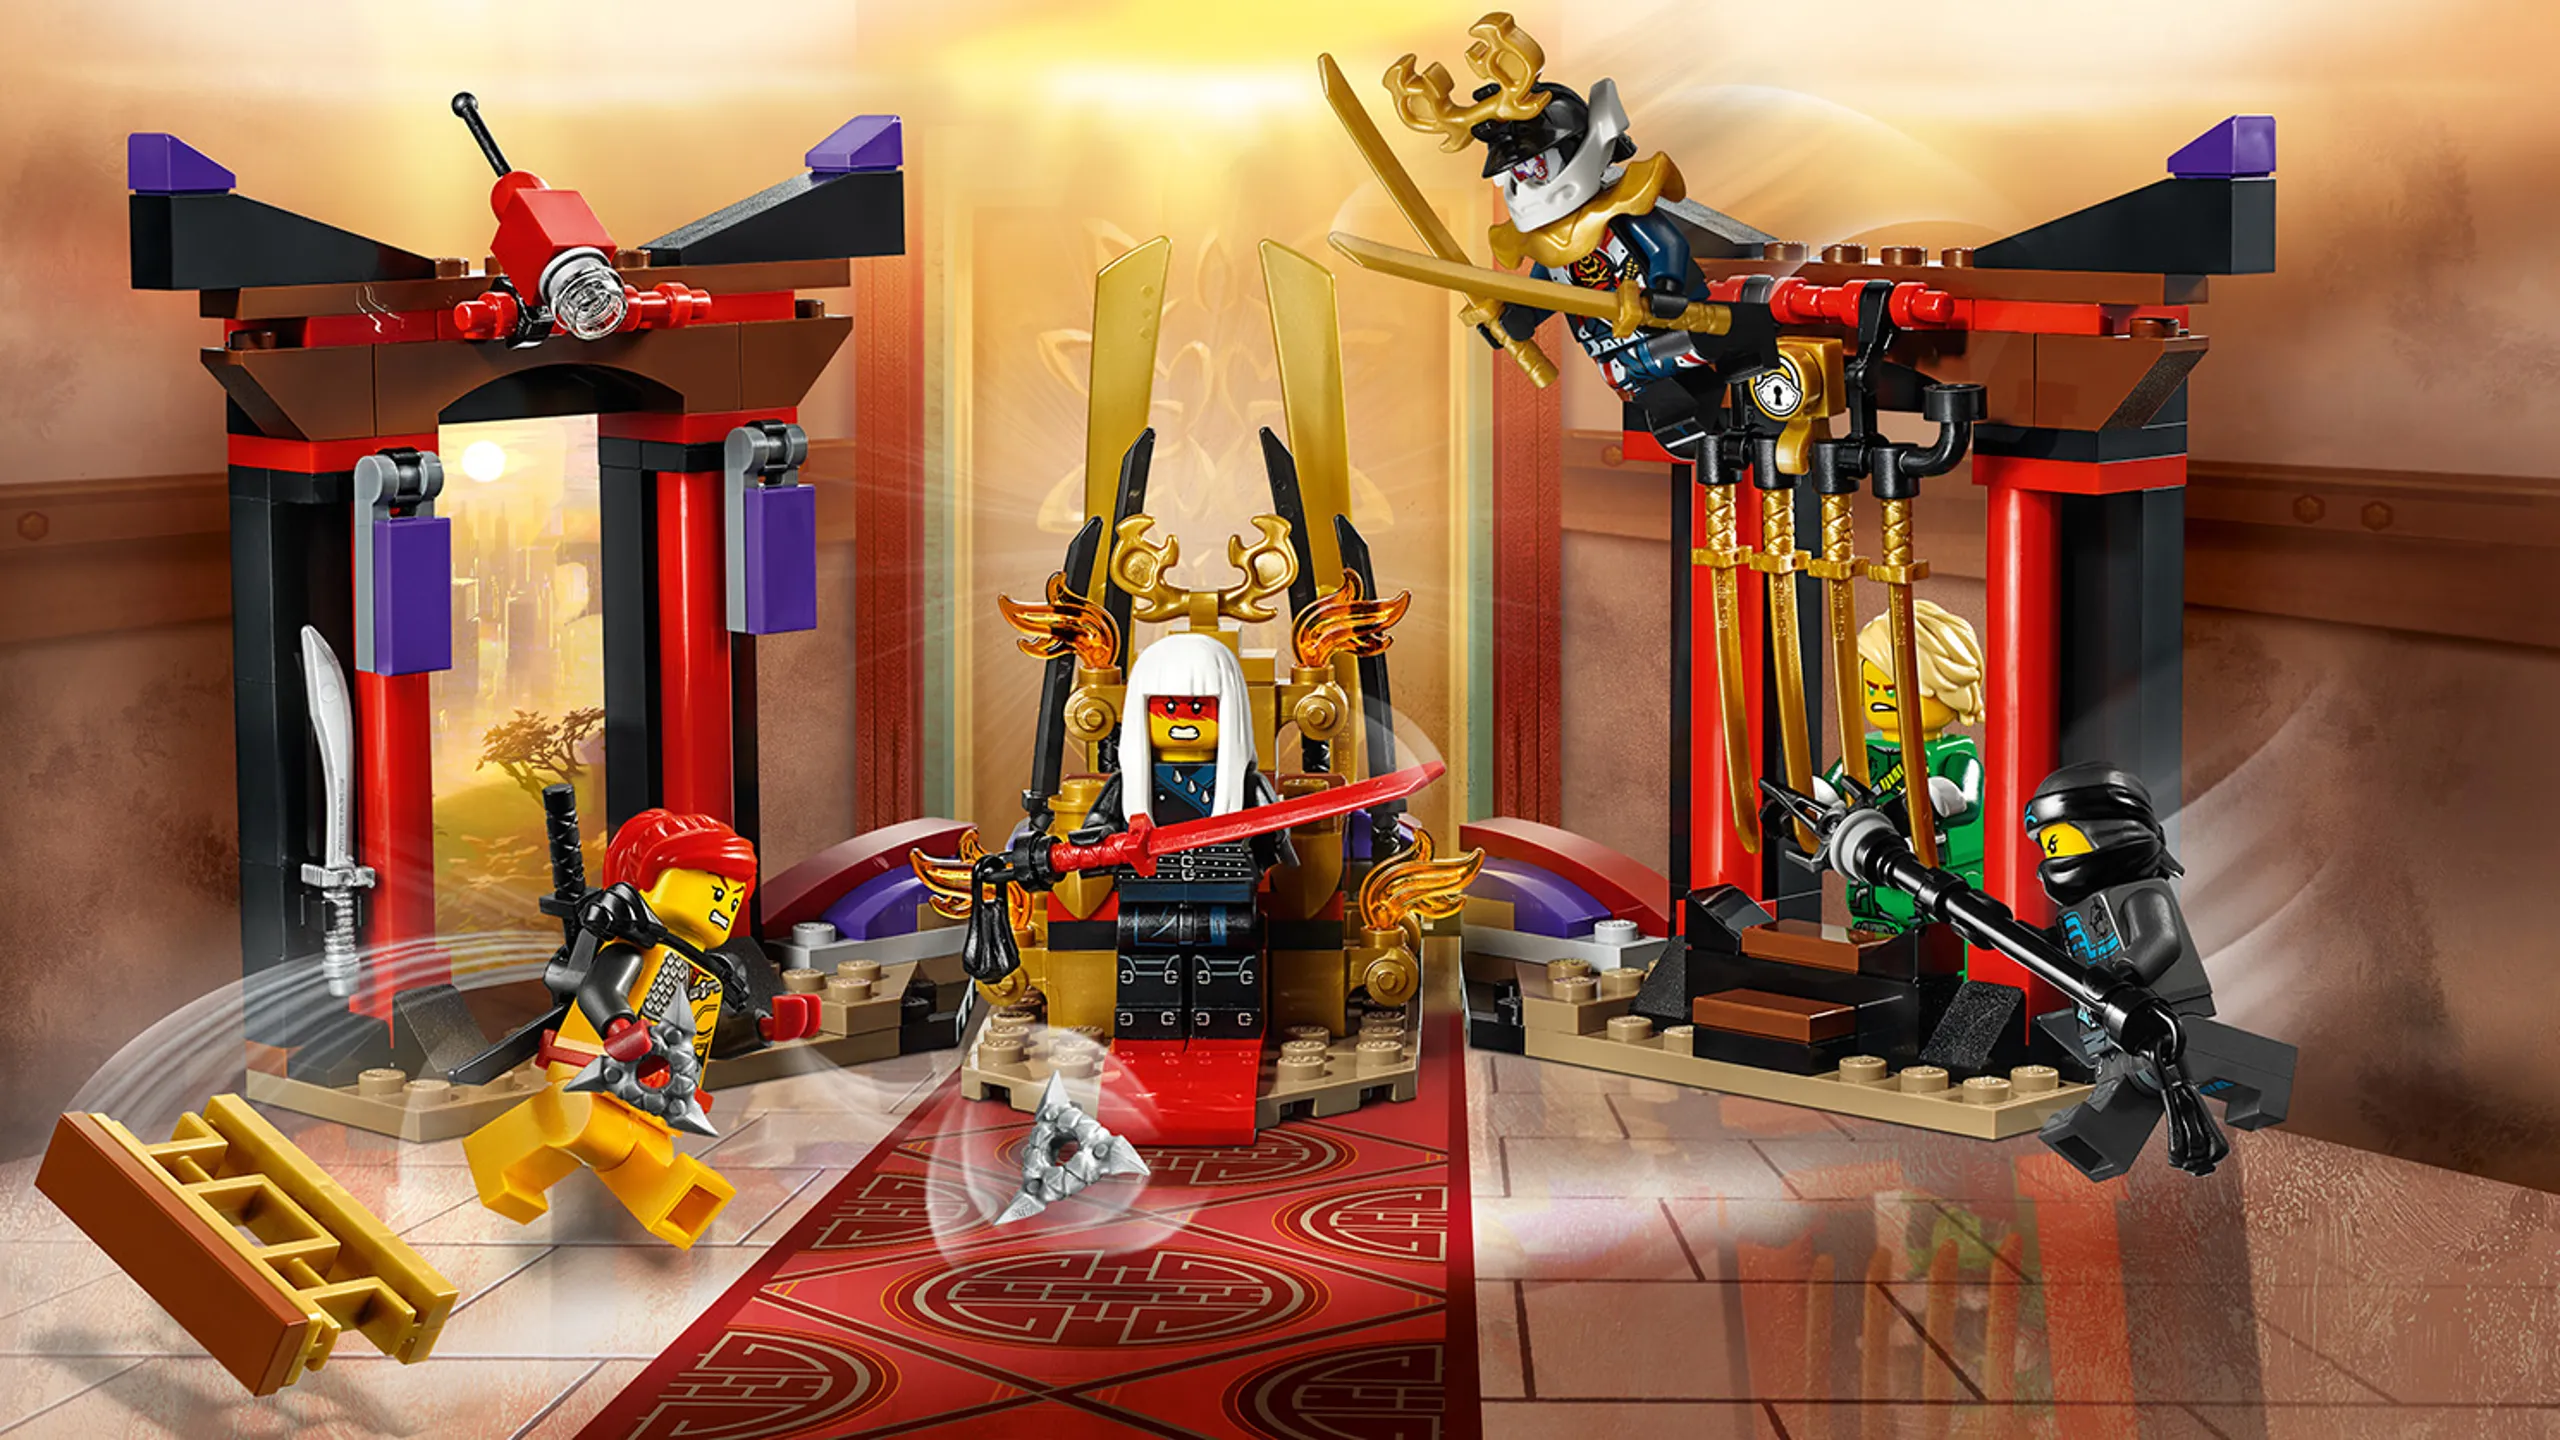 LEGO Ninjago - 70651 Thorne Room Showdown - Lloyd is trapped in the Palace of Secrets! Red haired Skylor smashes through the wall and Nya is in a face-off with Princess Harumi who has golden katanas.